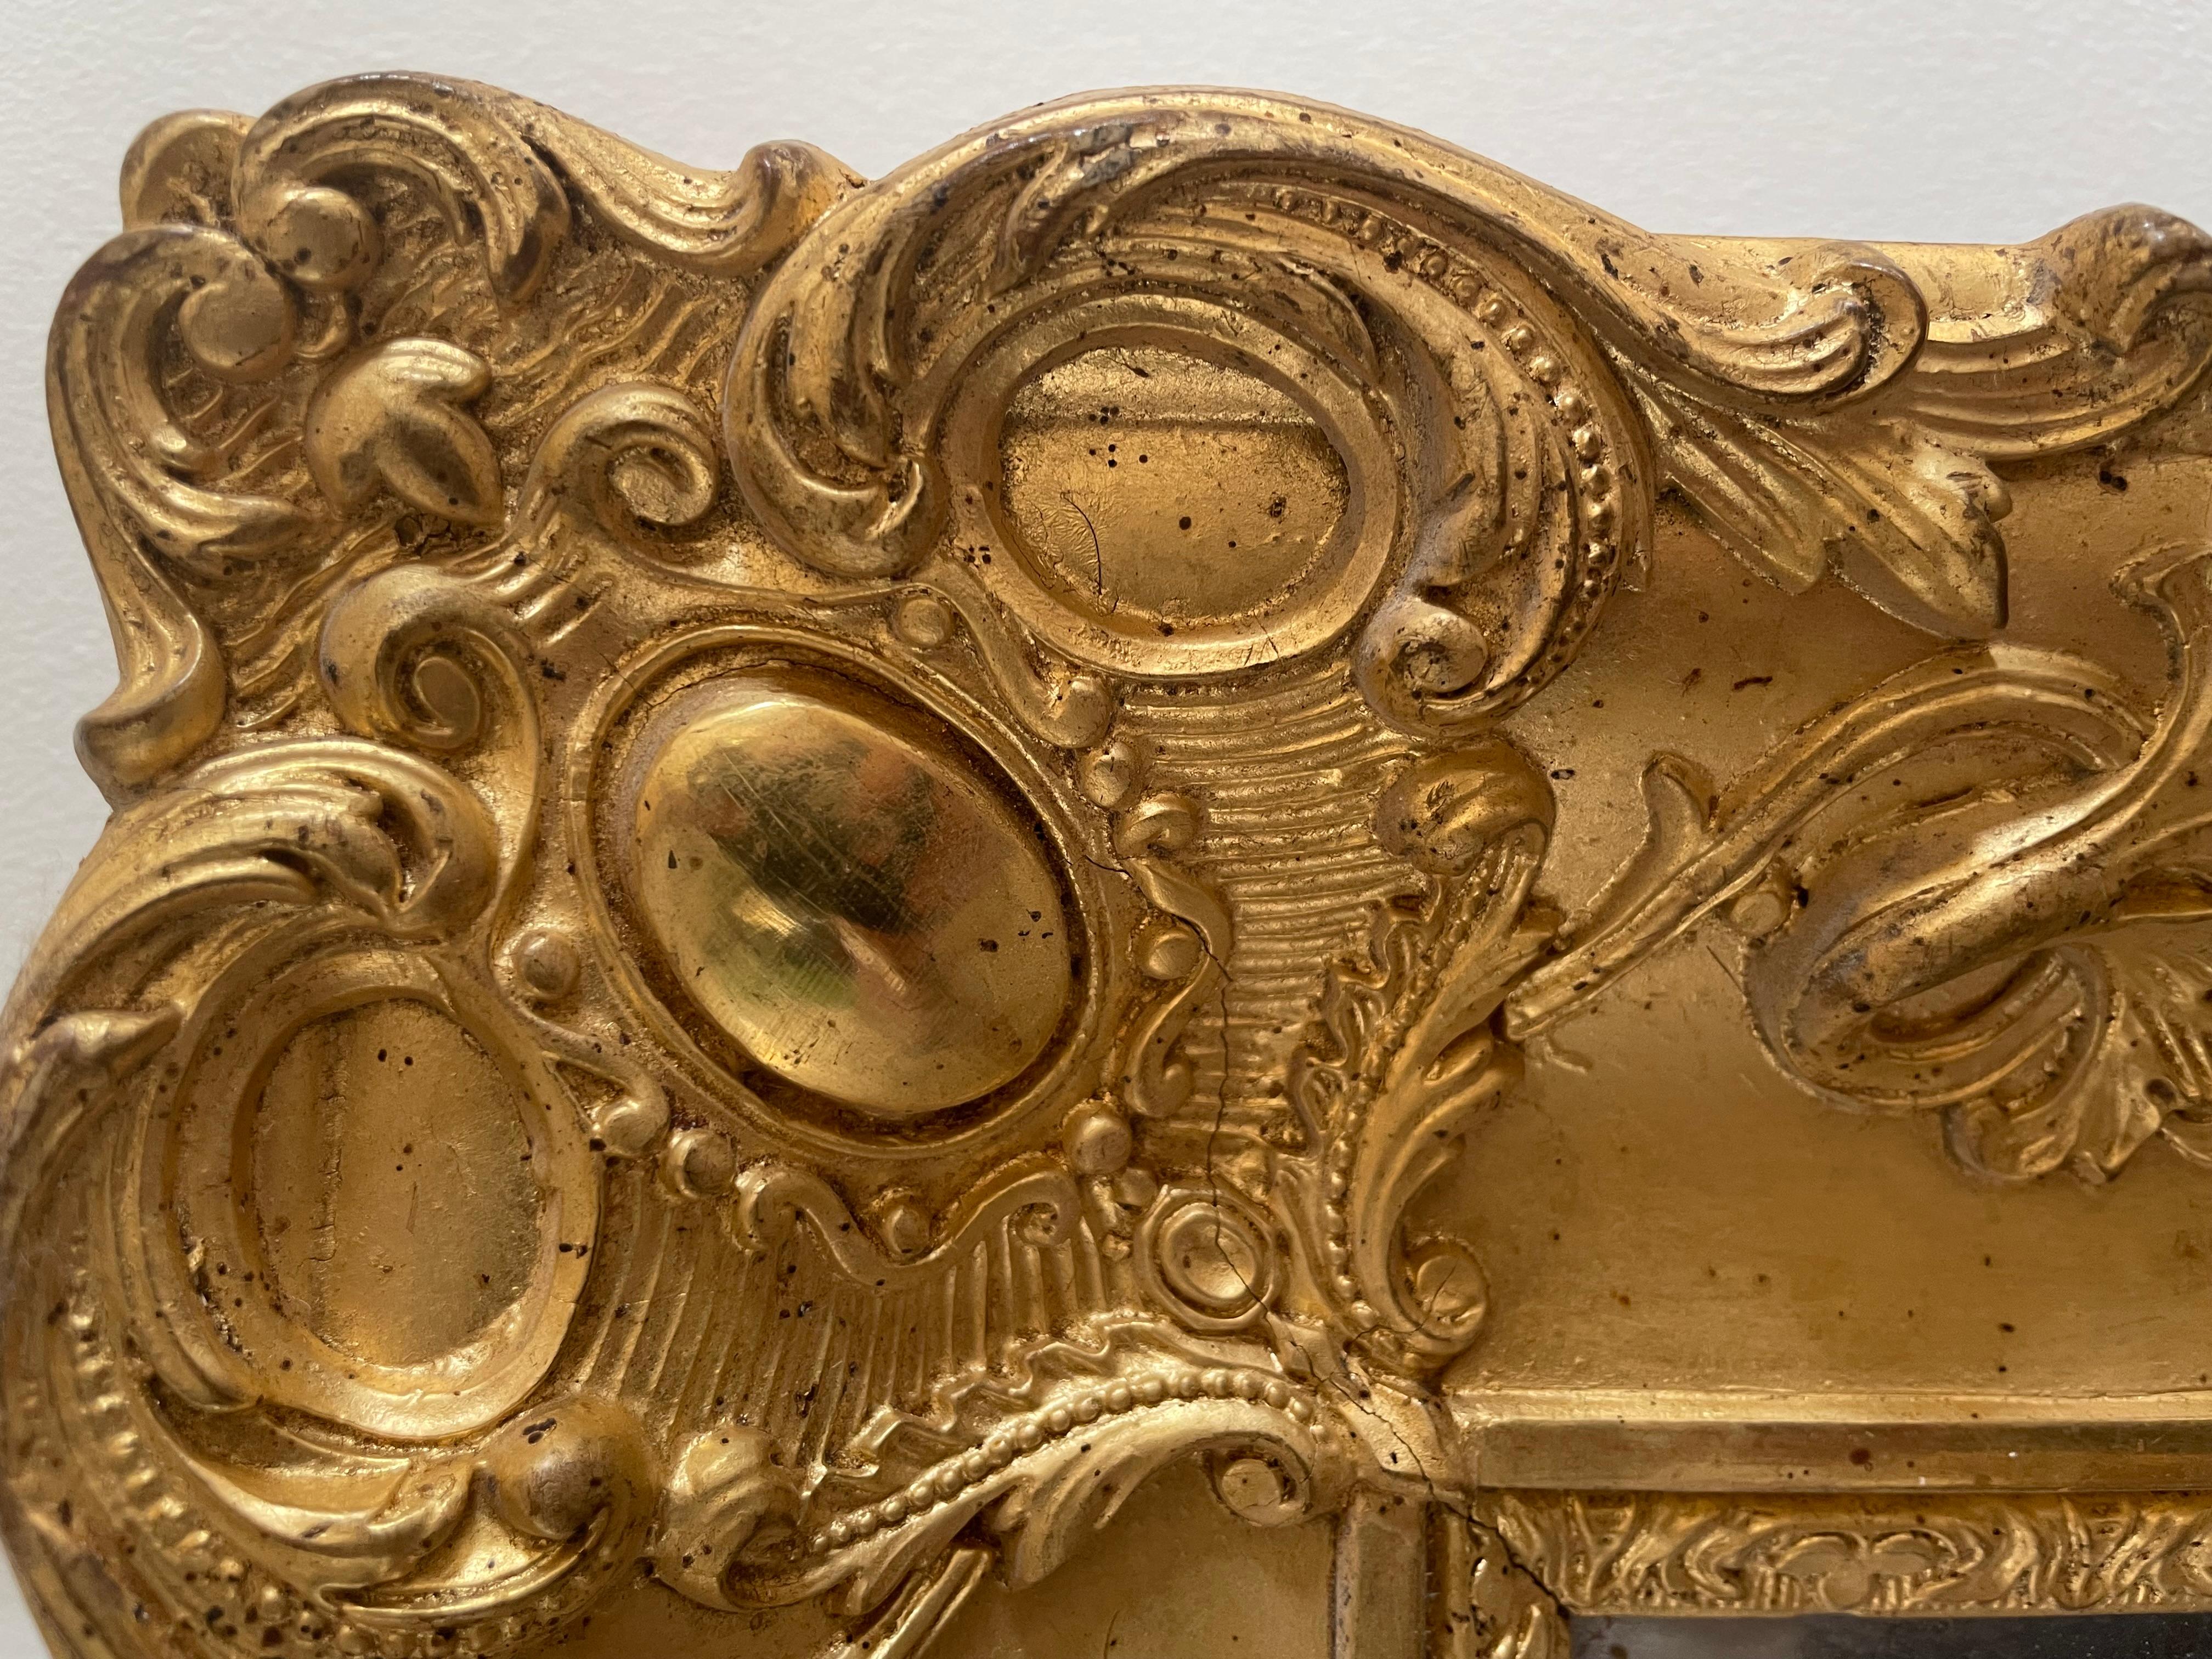 Superb gilded mirror of exceptional quality, without any lack or alteration, mercury mirror, very decorative and elegant, can be installed in the vertical as a horizontal.